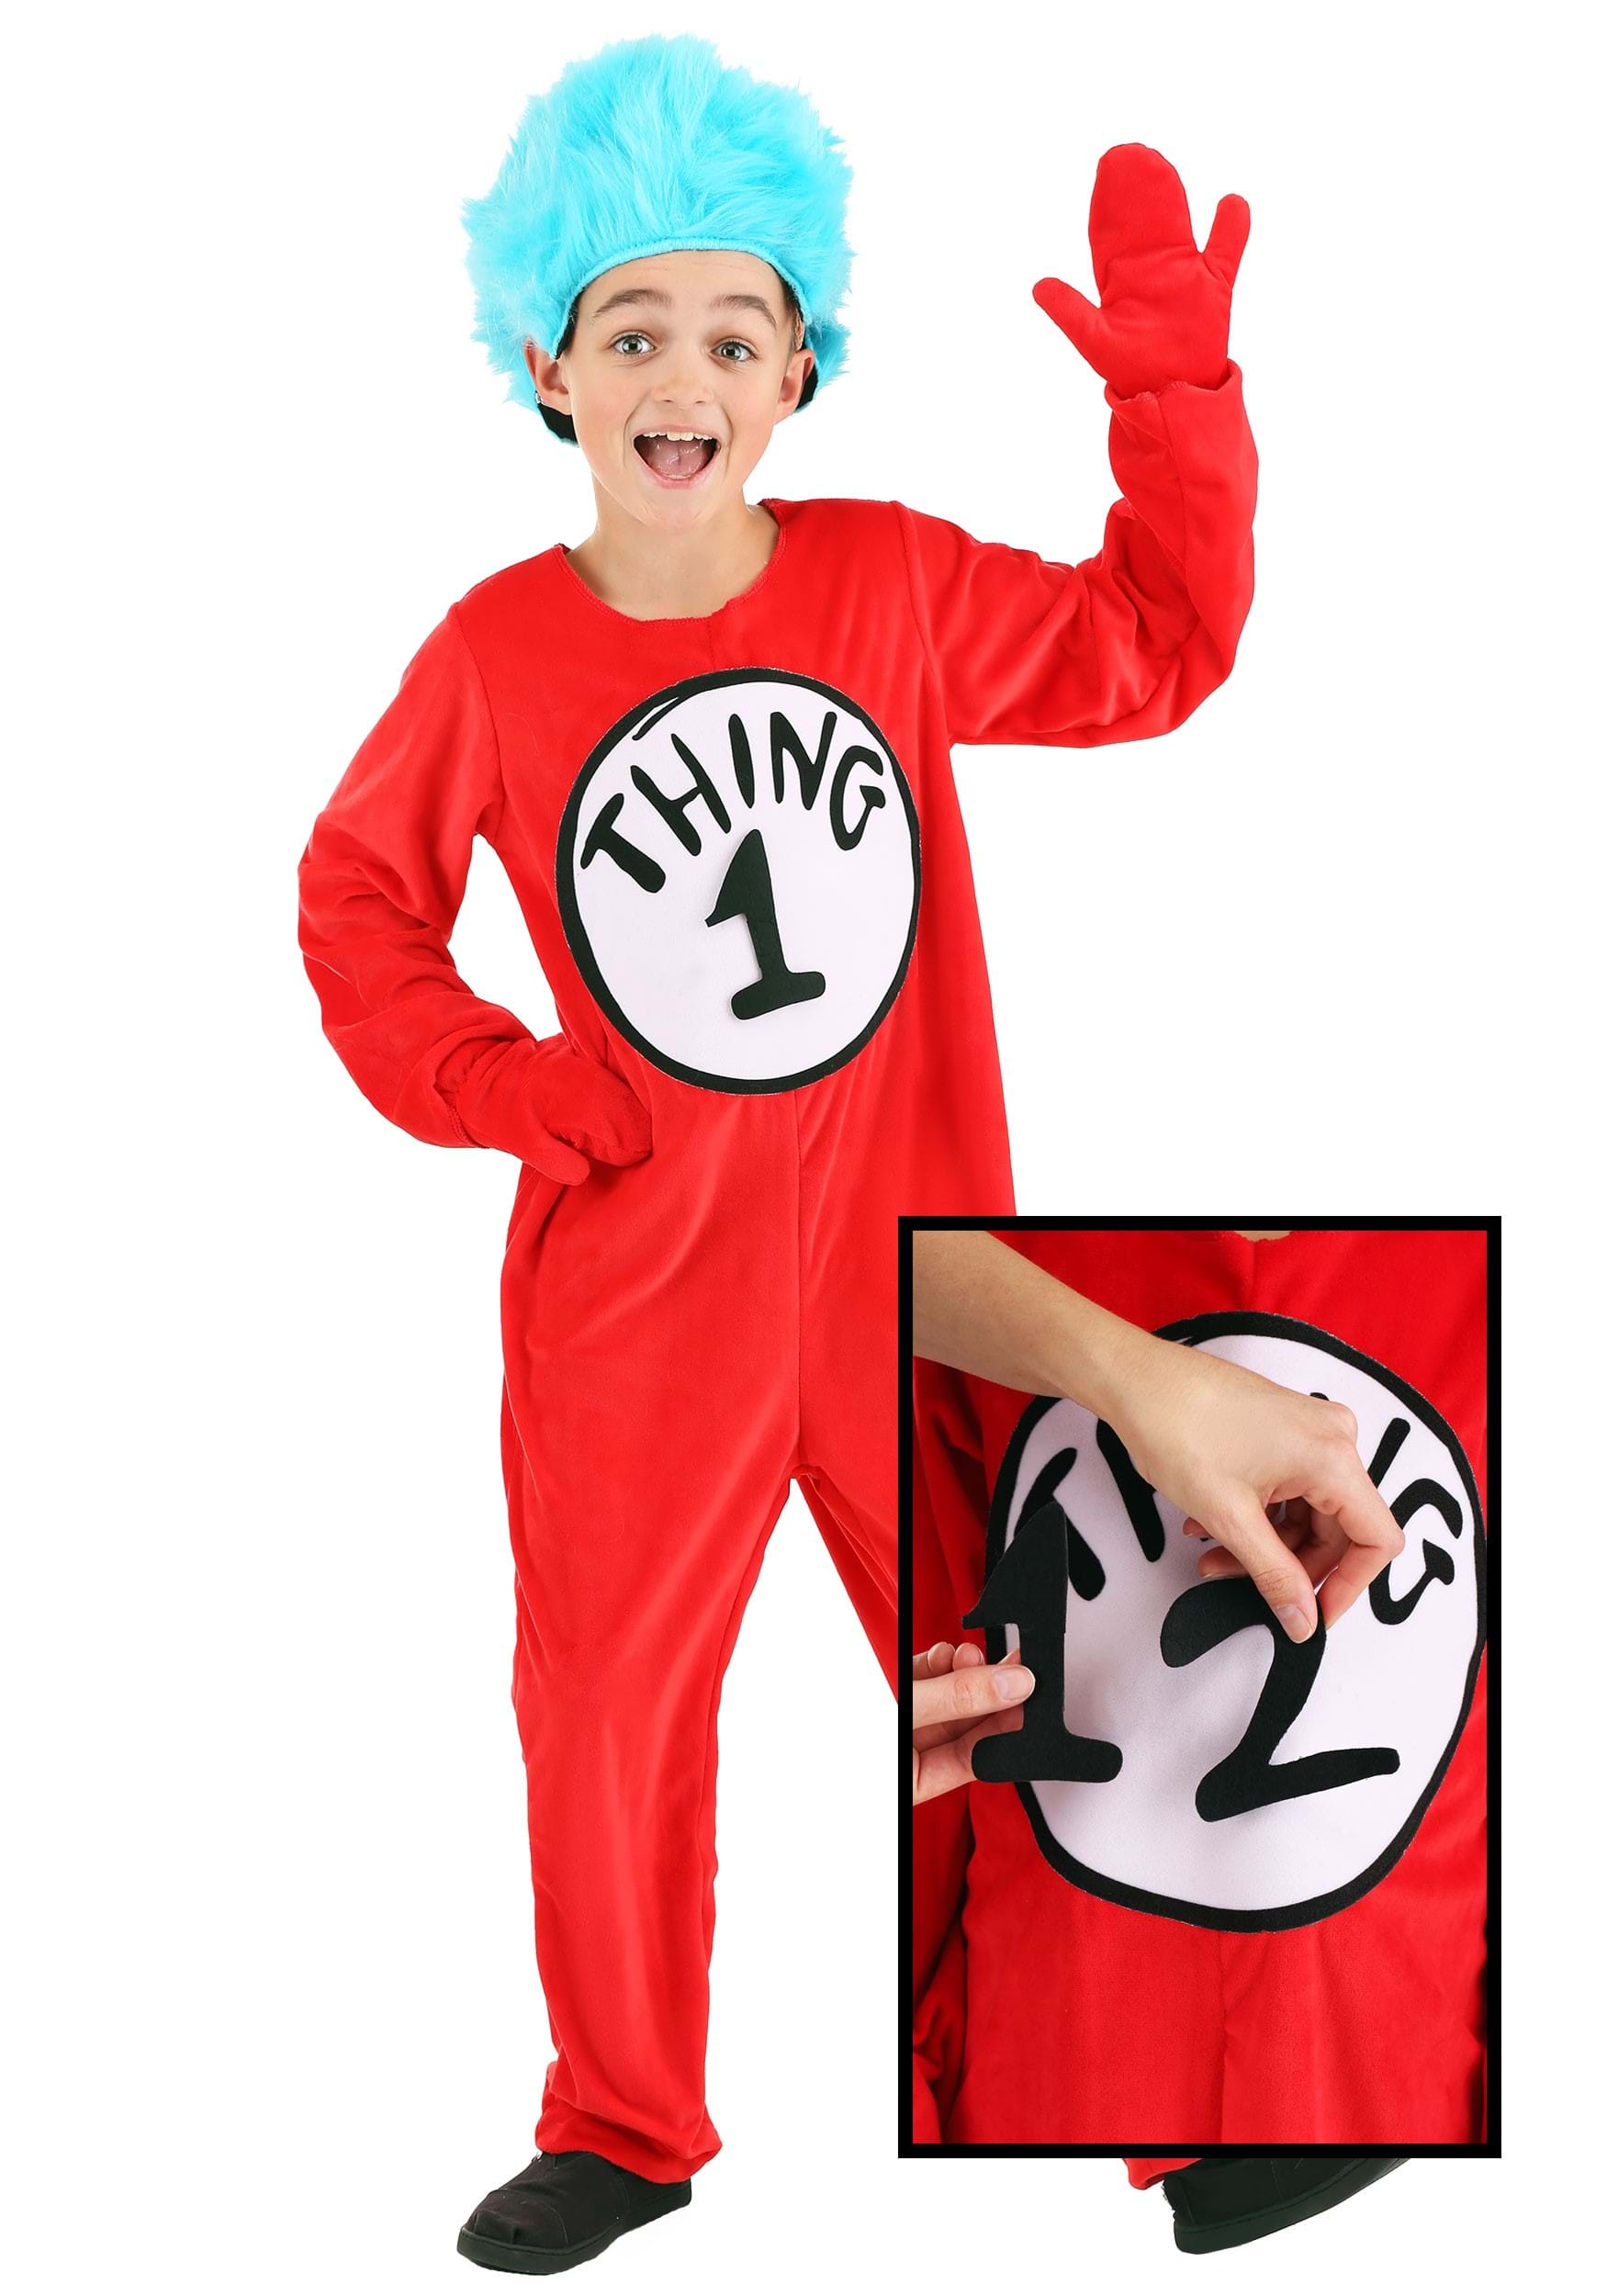 Photos - Fancy Dress Deluxe FUN Costumes Thing 1&2  Kids Costume Red/Blue/White 